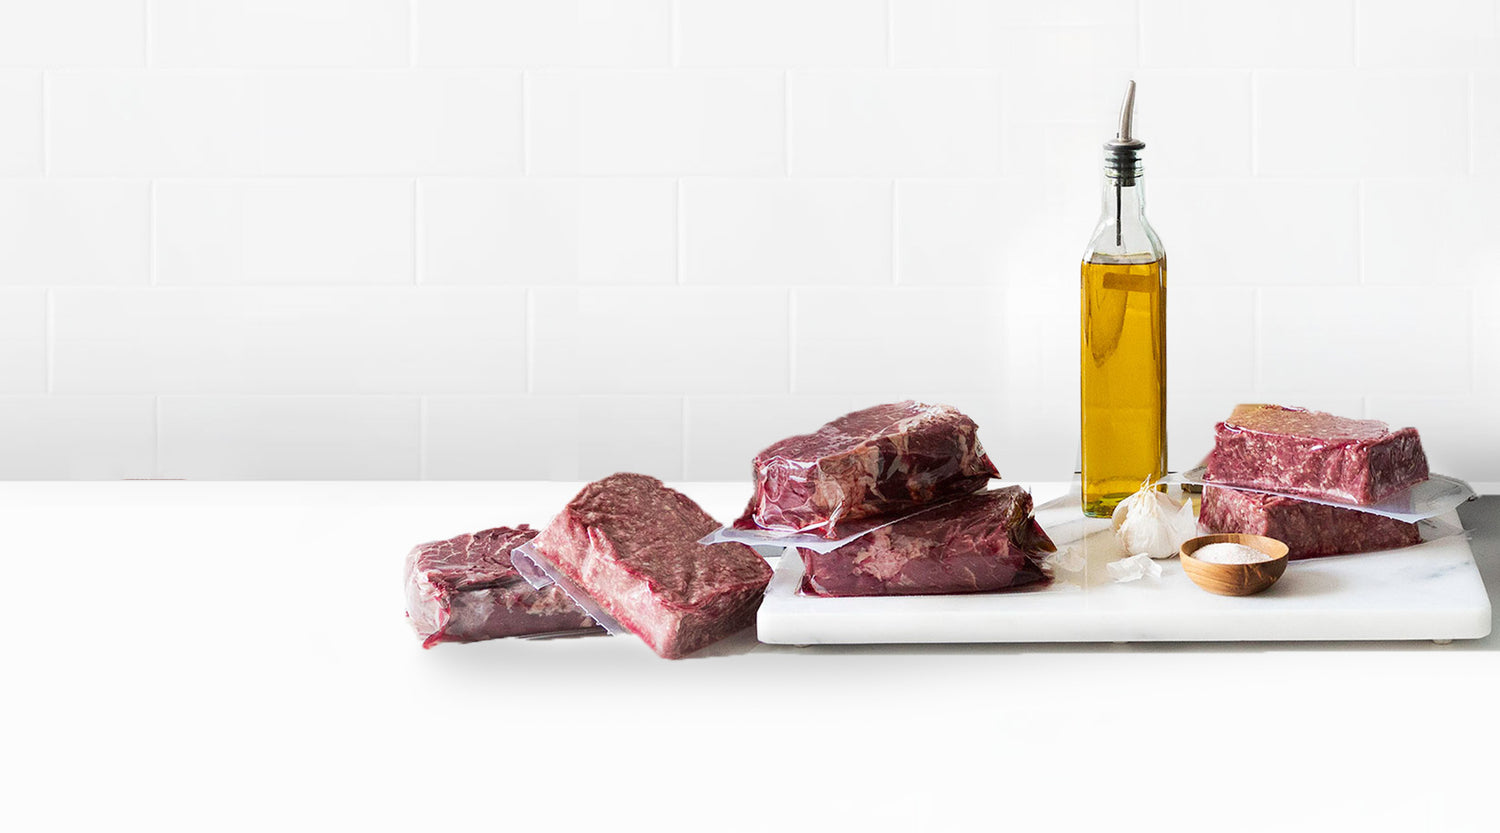 Packaged Steaks with Olive Oil Bottle